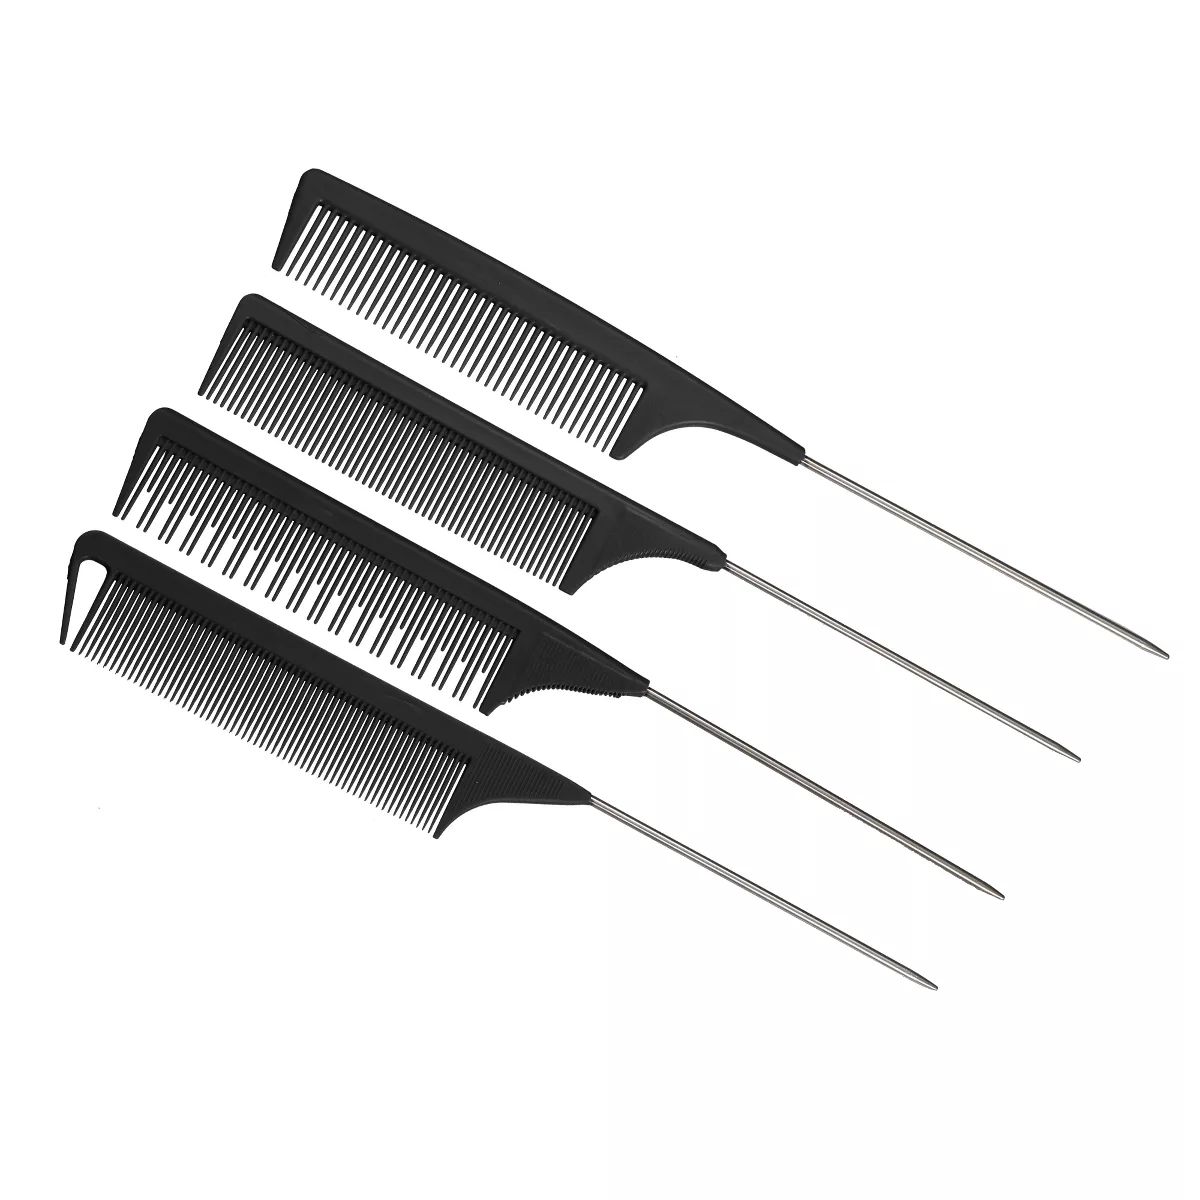 Unique Bargains 4 Pcs Tail Comb for Home Use, Styling Comb, Steel Handle Hair Combs Black | Target